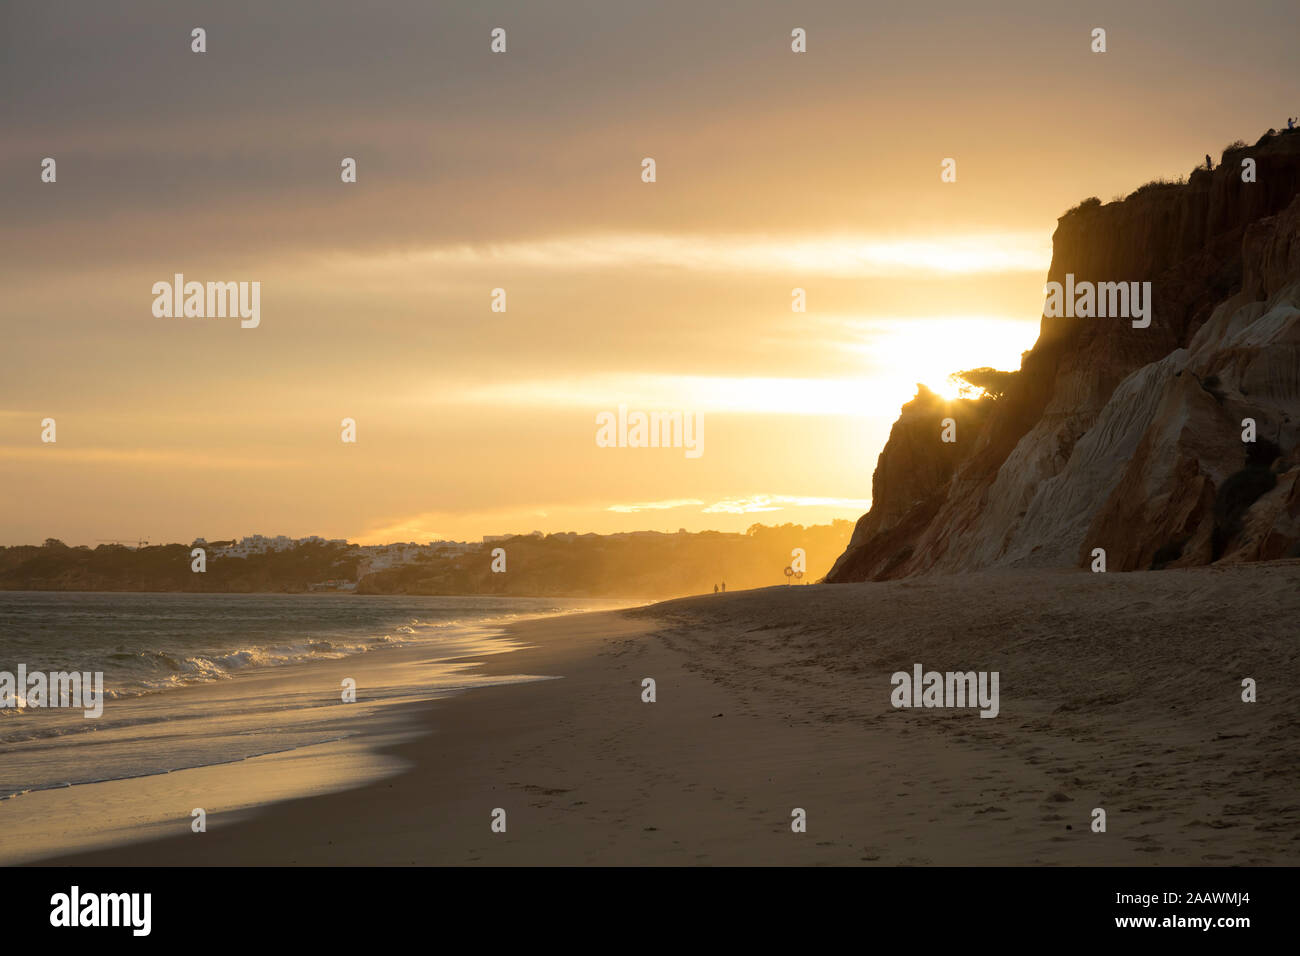 Scenic view of beach against cloudy sky during sunset, Atlantic Coast, Algarve, Portugal Stock Photo